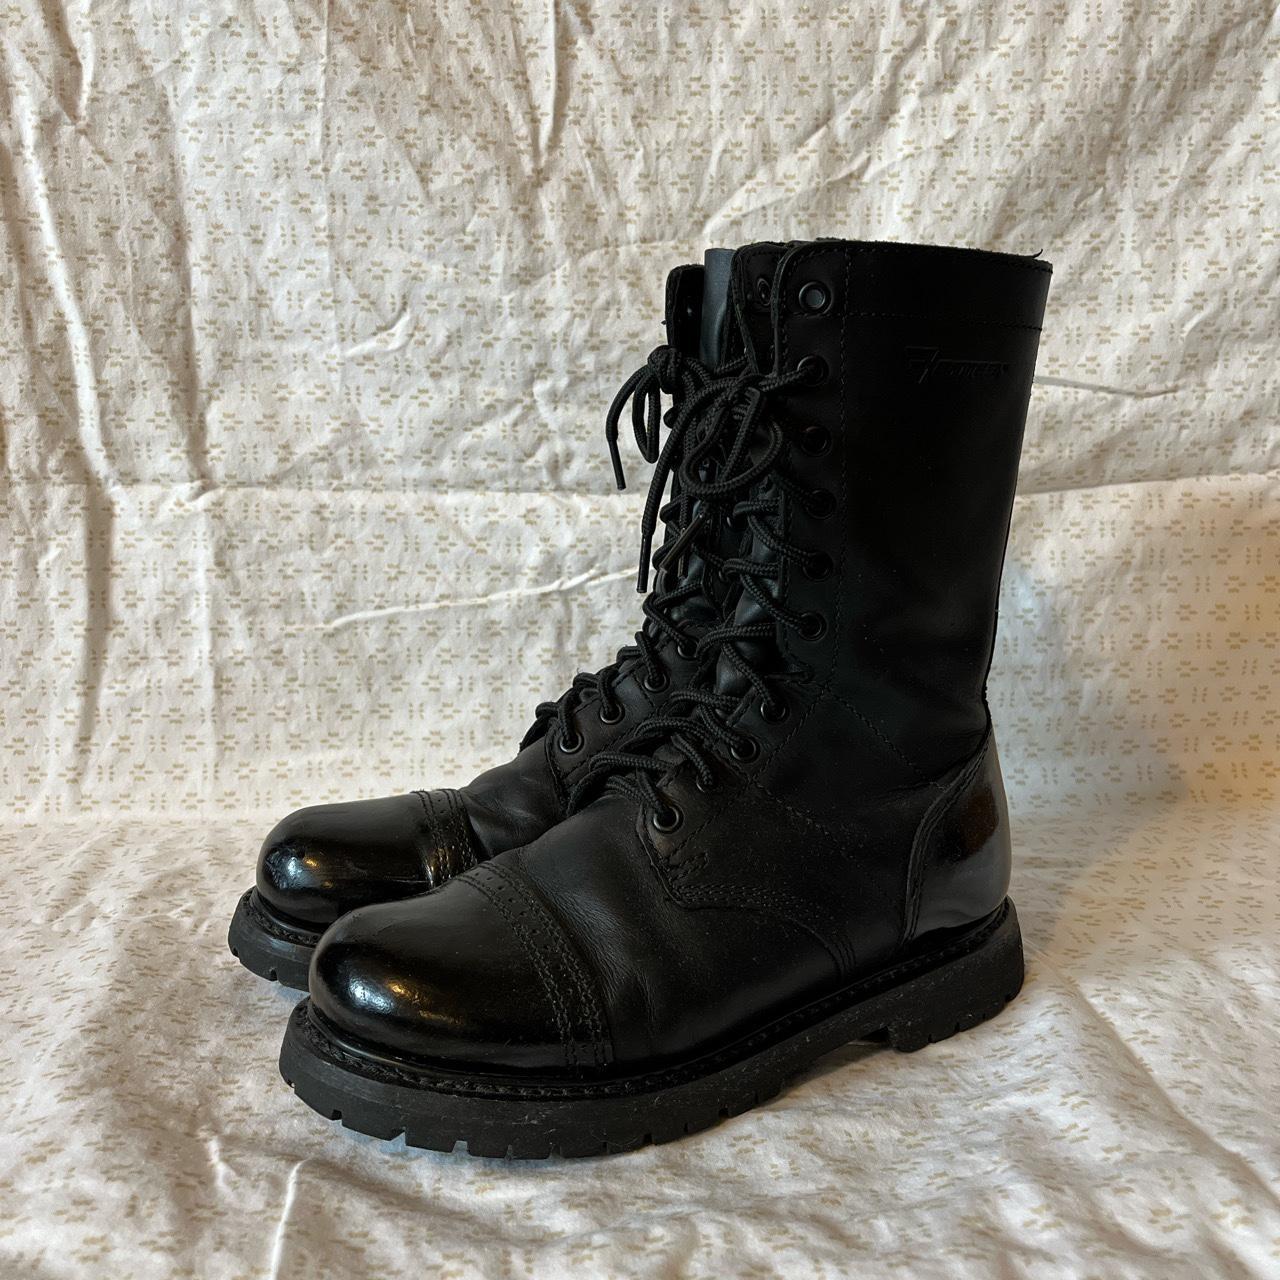 Bates 11” leather combat boots in black with glossy... - Depop